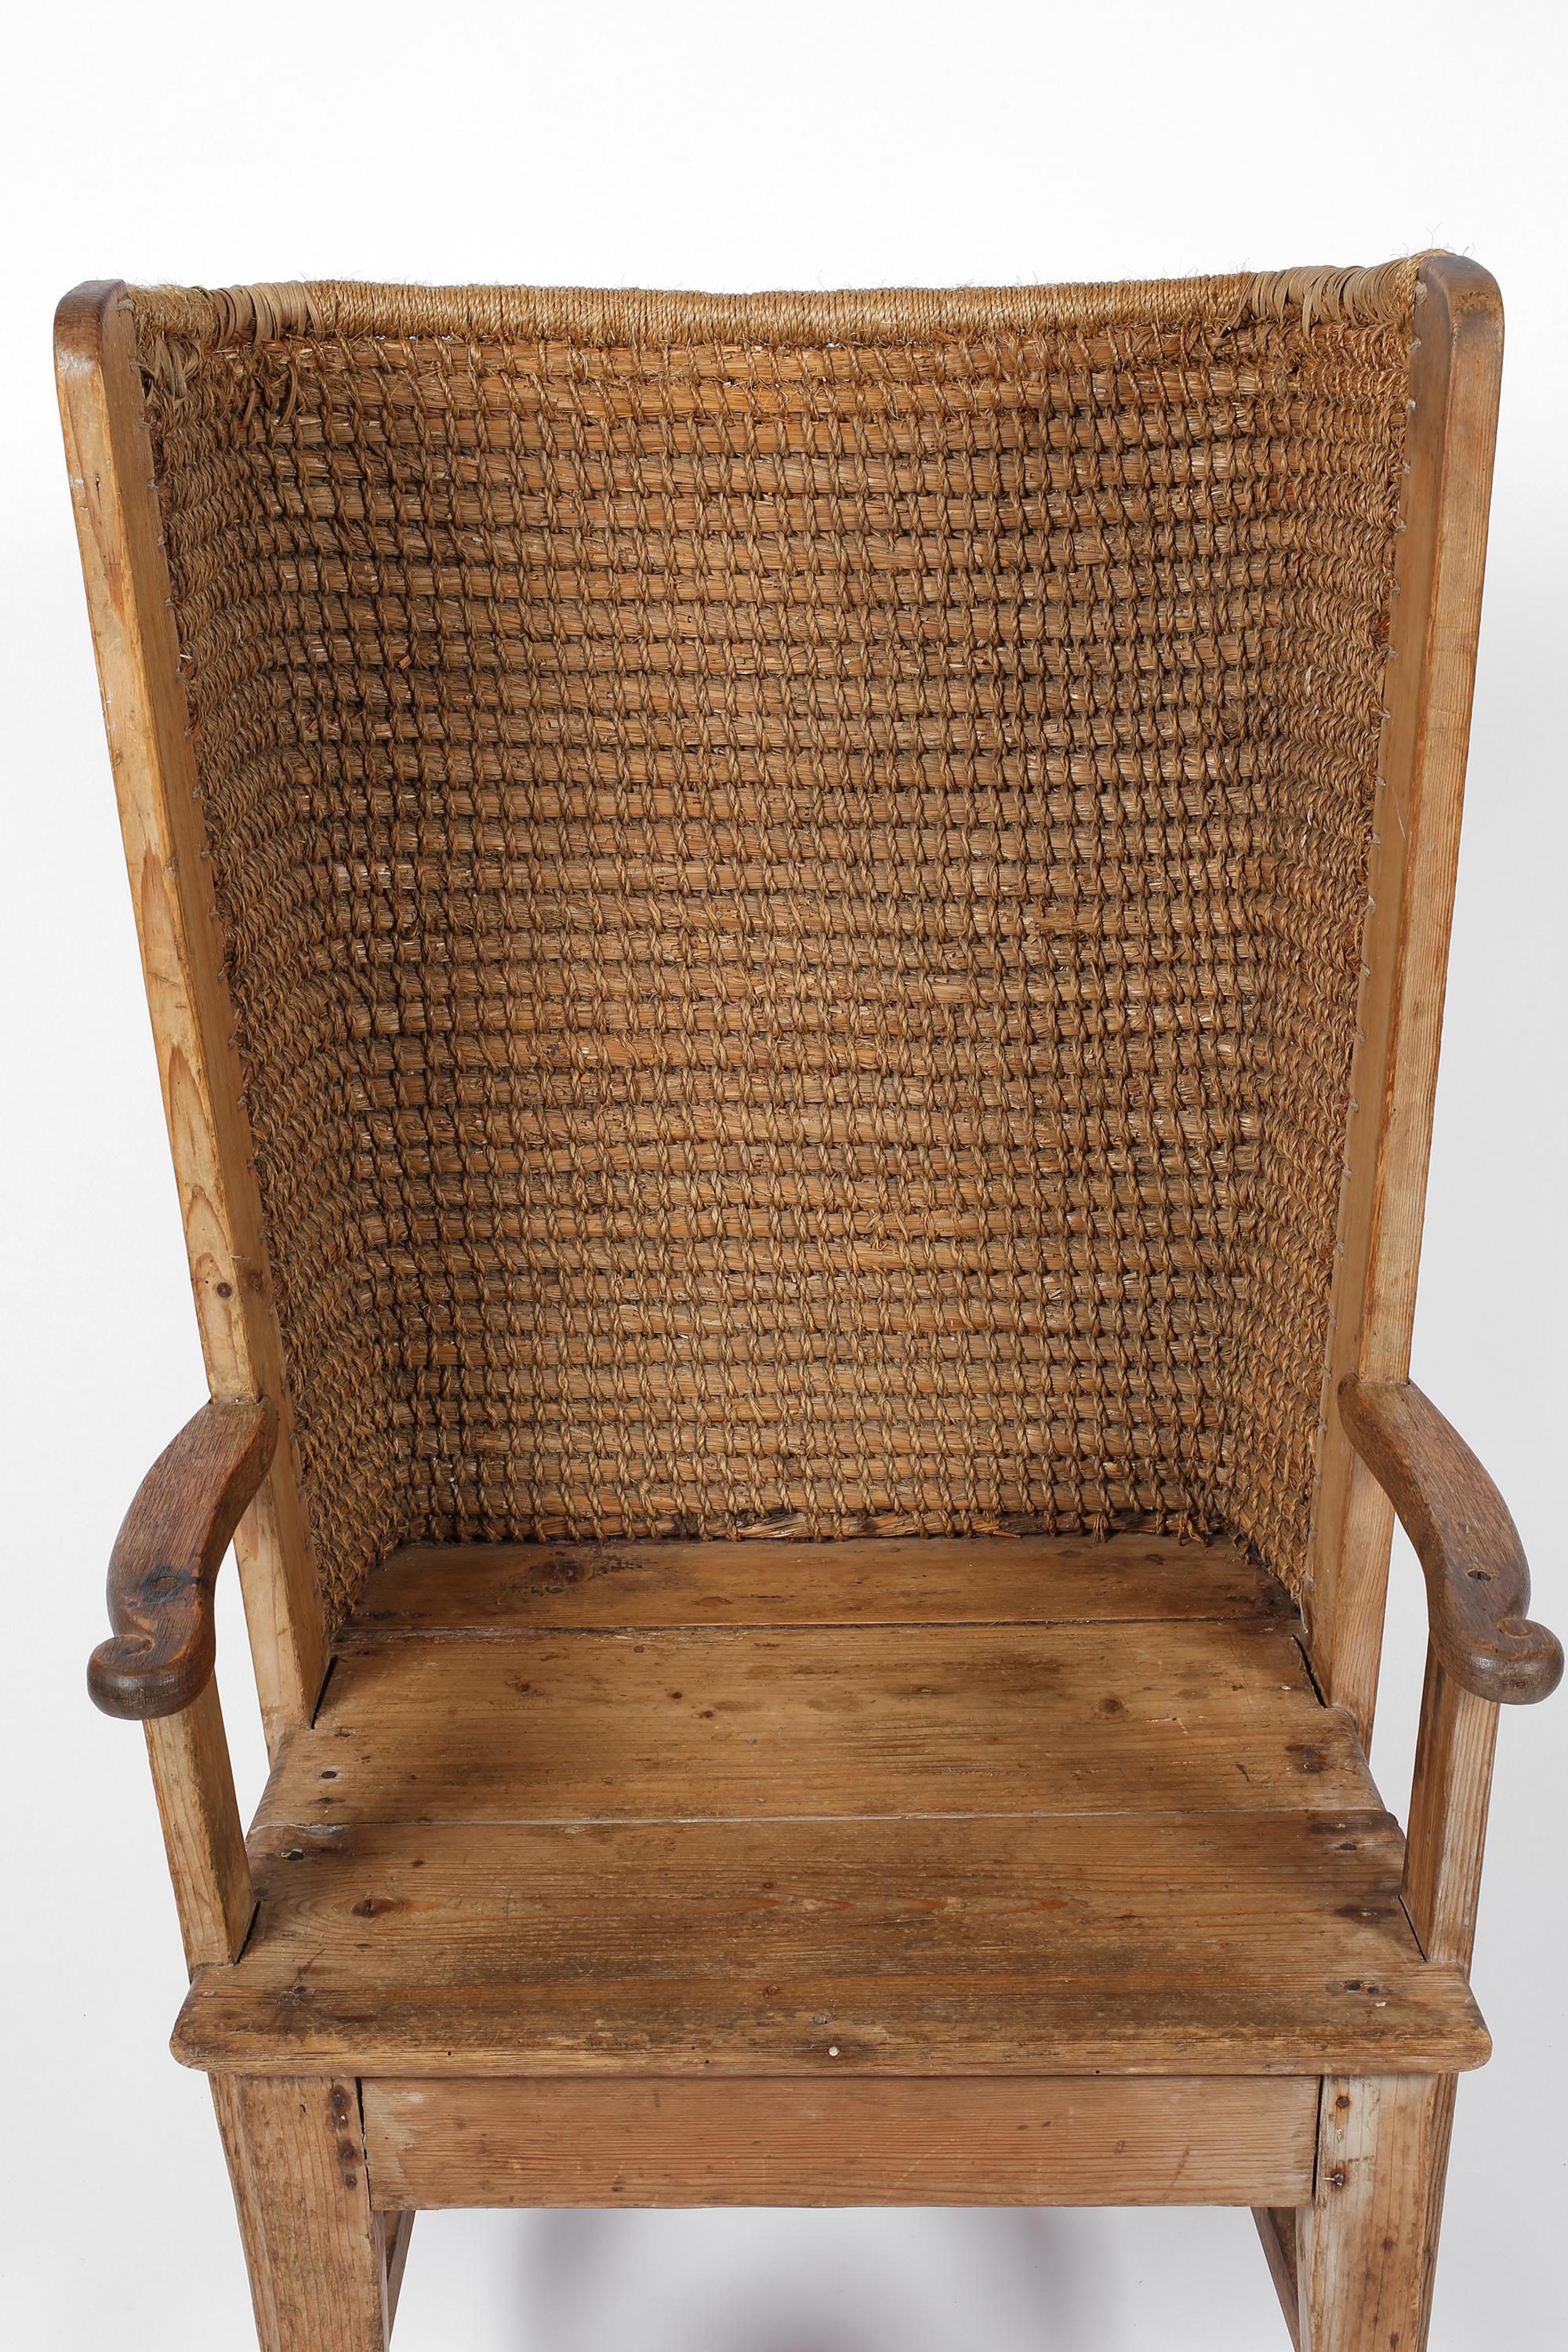 Late 19th Century Scottish Vernacular Pine and Woven Straw Orkney Chair 10